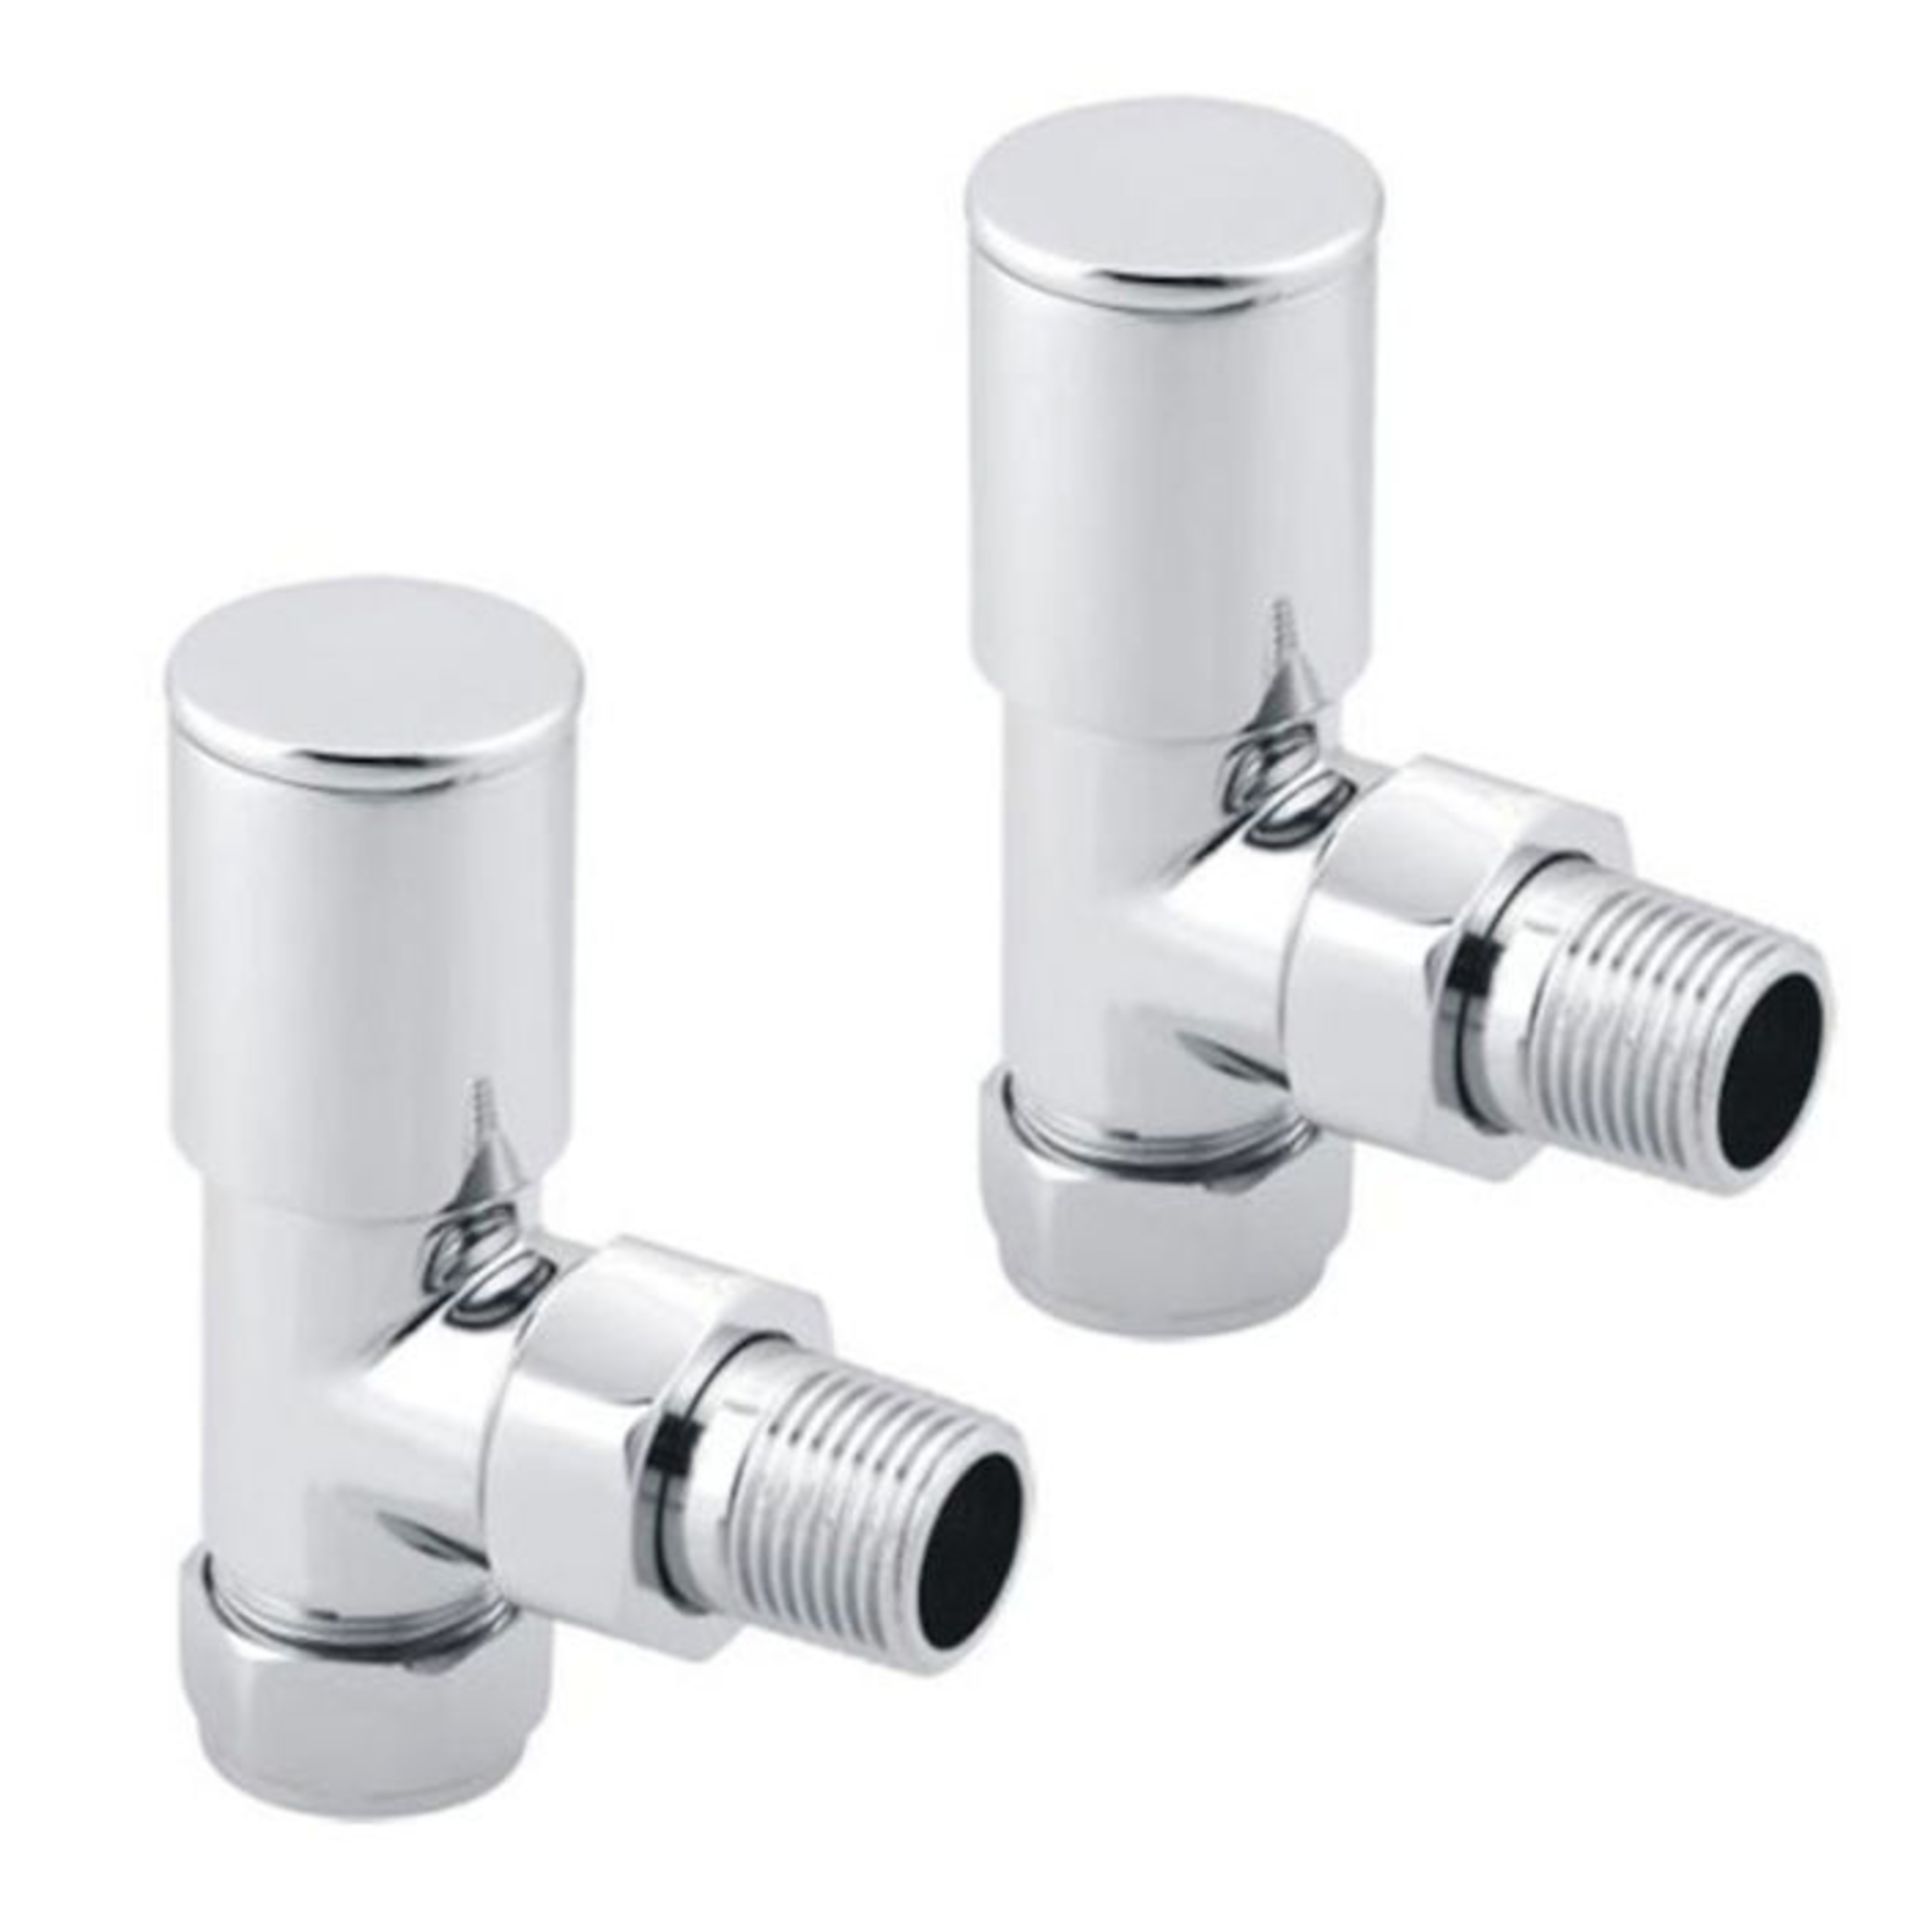 (P47) 15mm Standard Connection Angled Radiator Valves - Heavy Duty Polished Chrome Plated Brass - Image 2 of 2